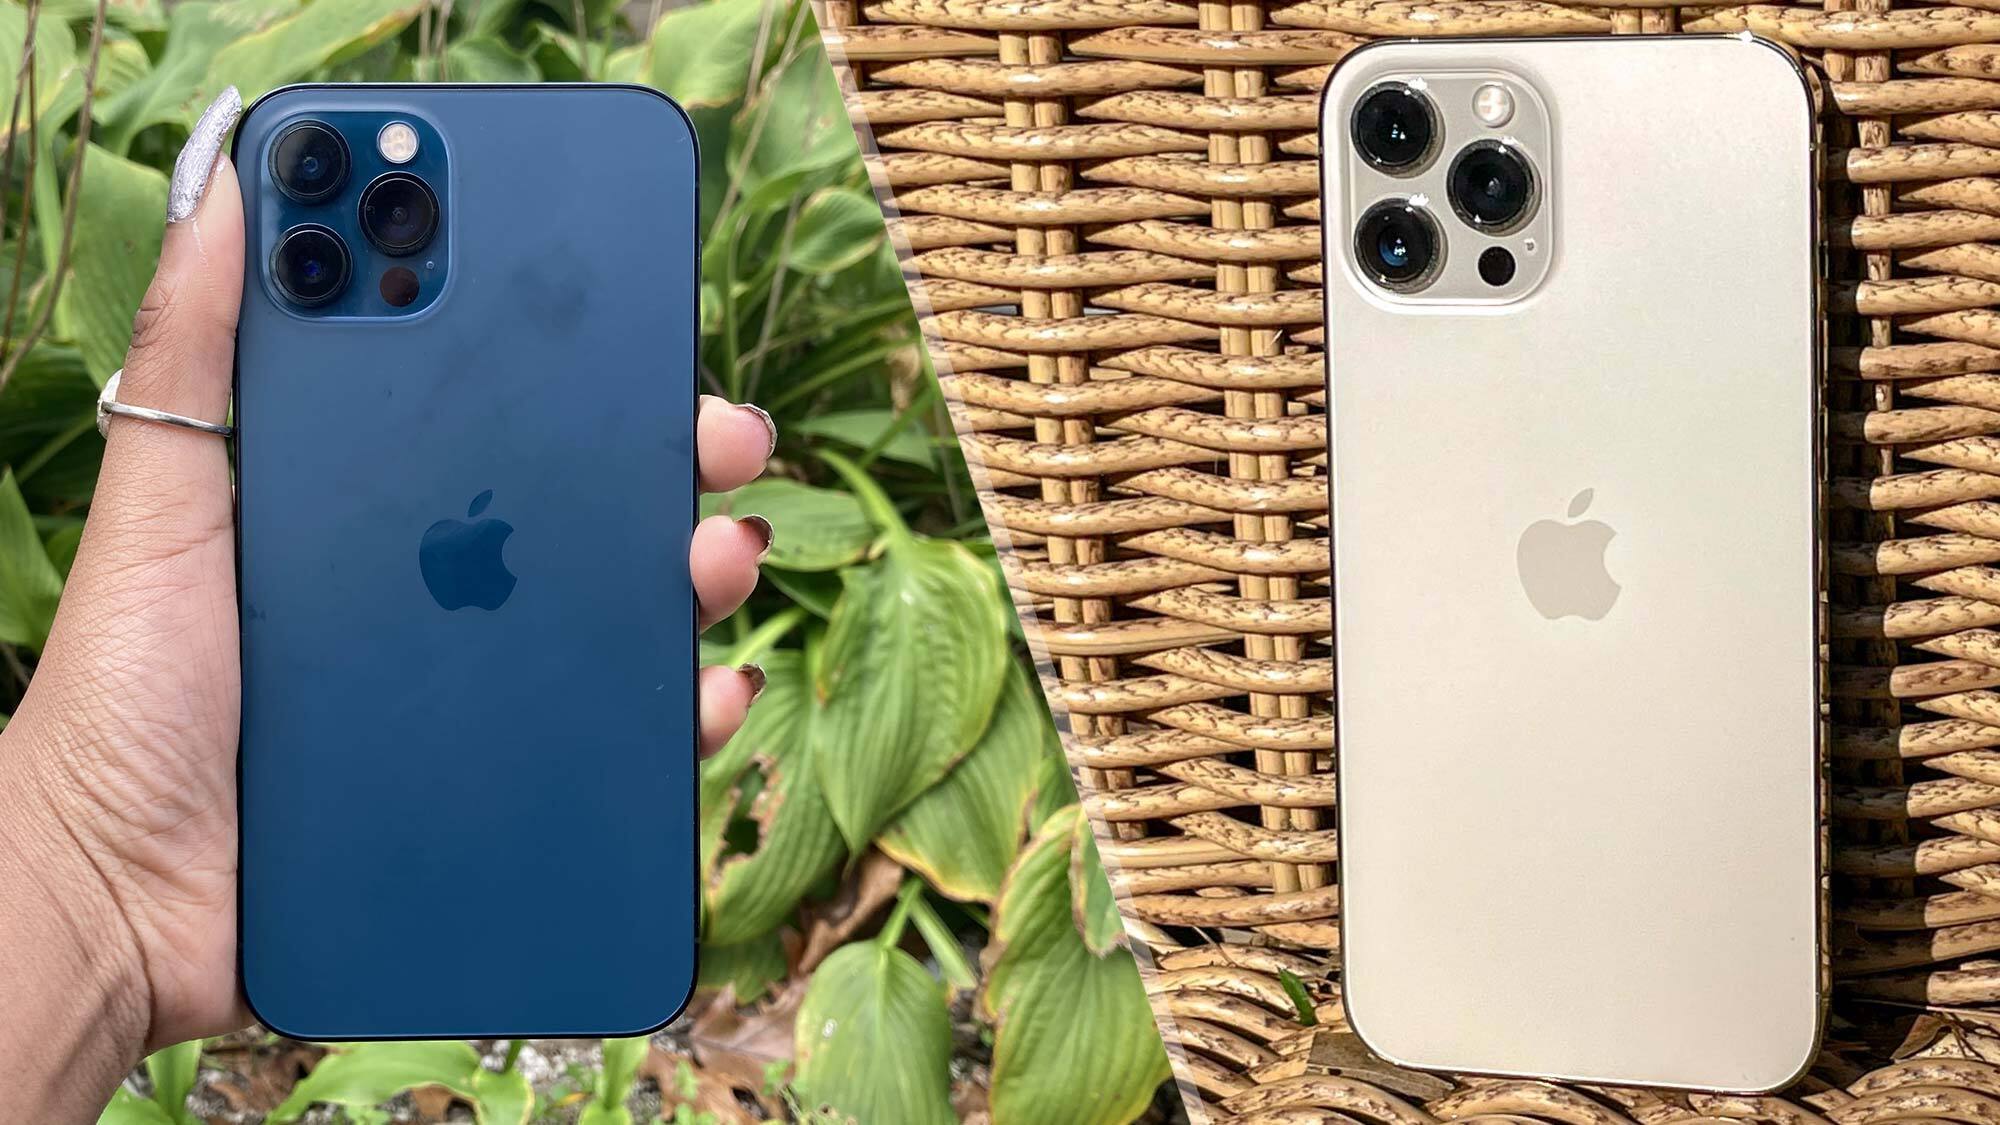 Iphone 12 Pro Vs Iphone 12 Pro Max Which Should You Buy Laptop Mag